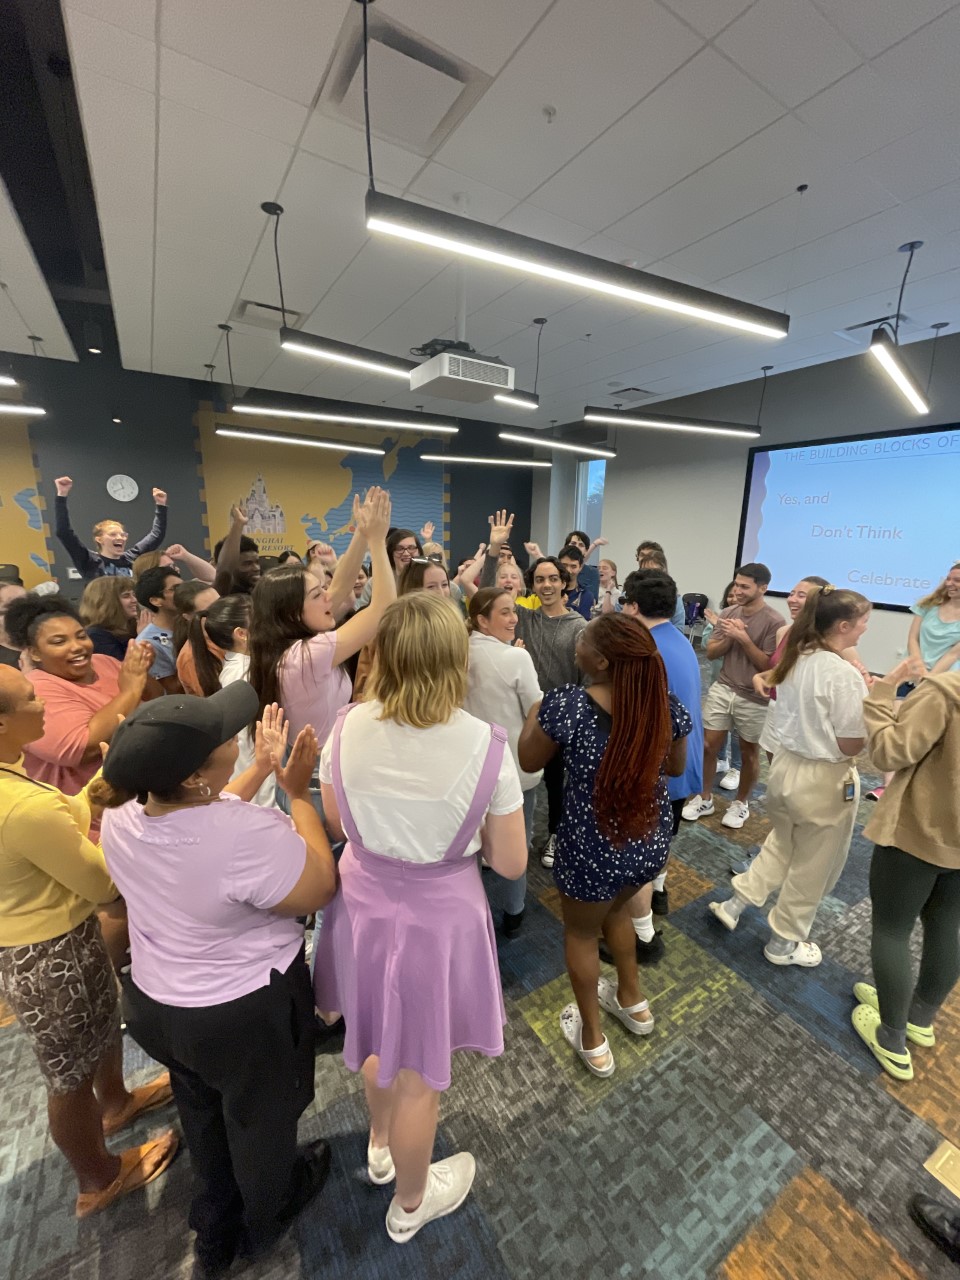 Group of Disney Programs Learning participants clapping after a presentation